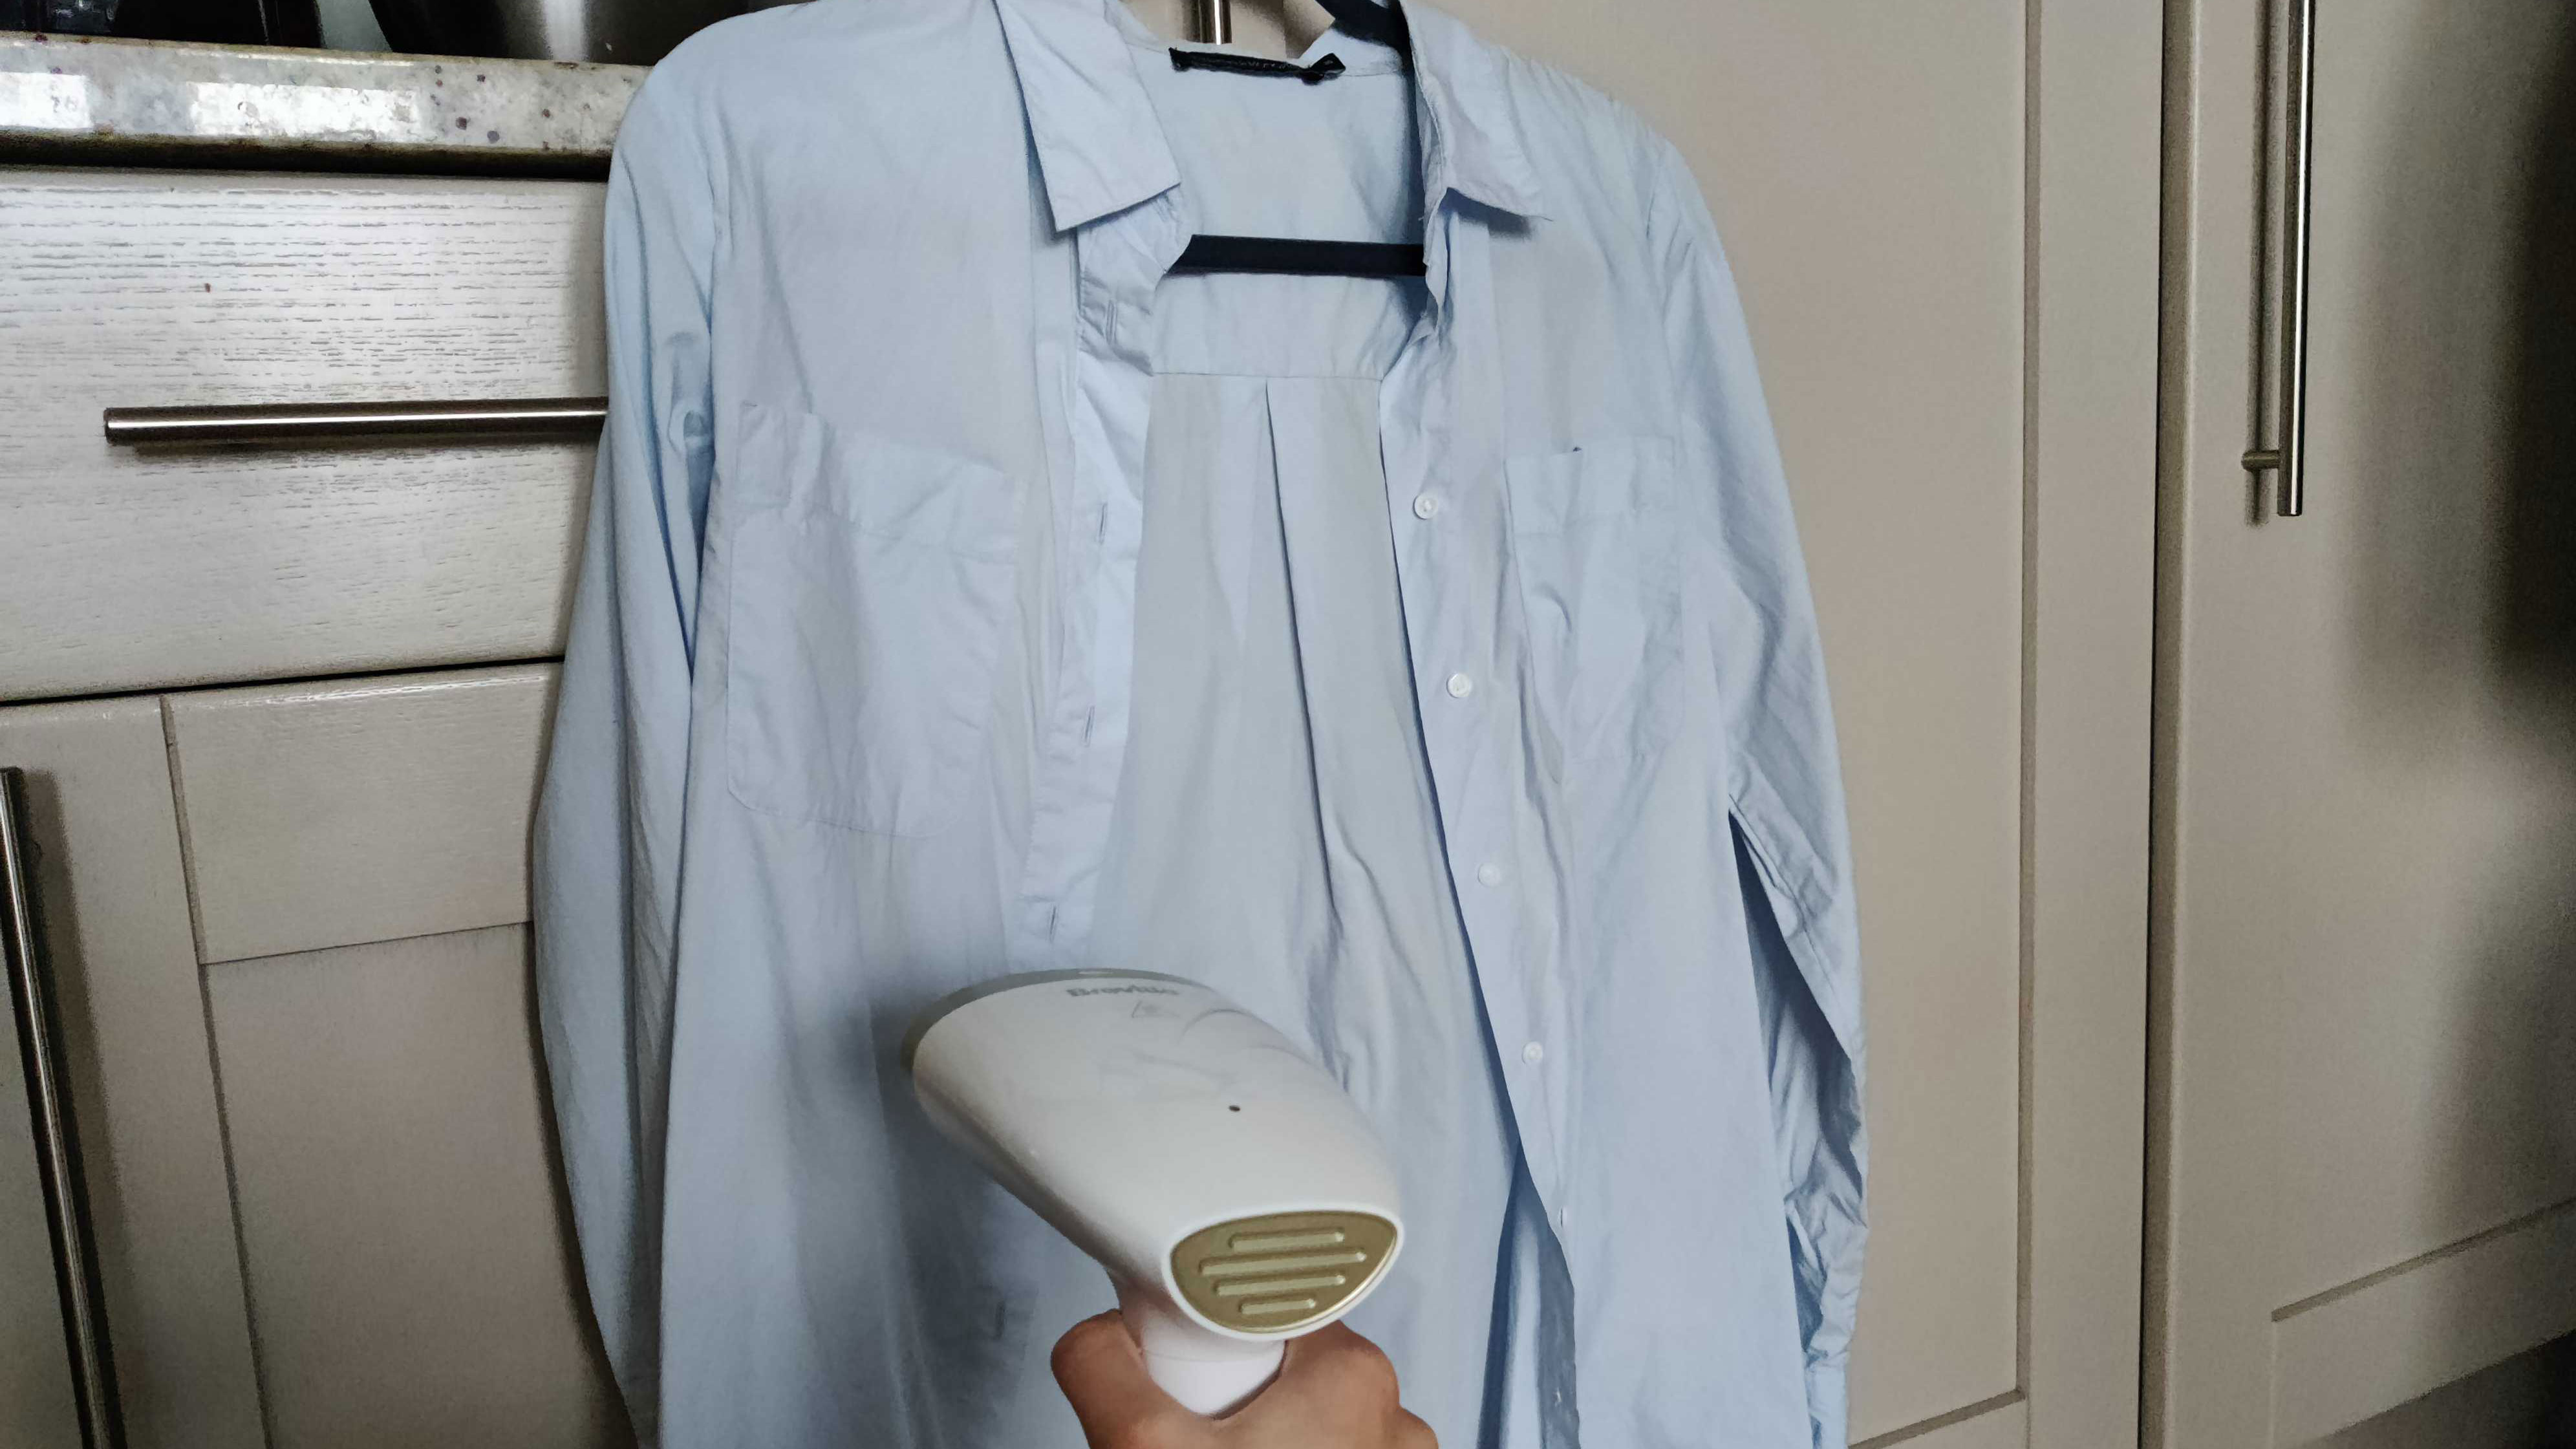 I kicked my dry cleaning habit and saved $100s by taking better care of my clothes